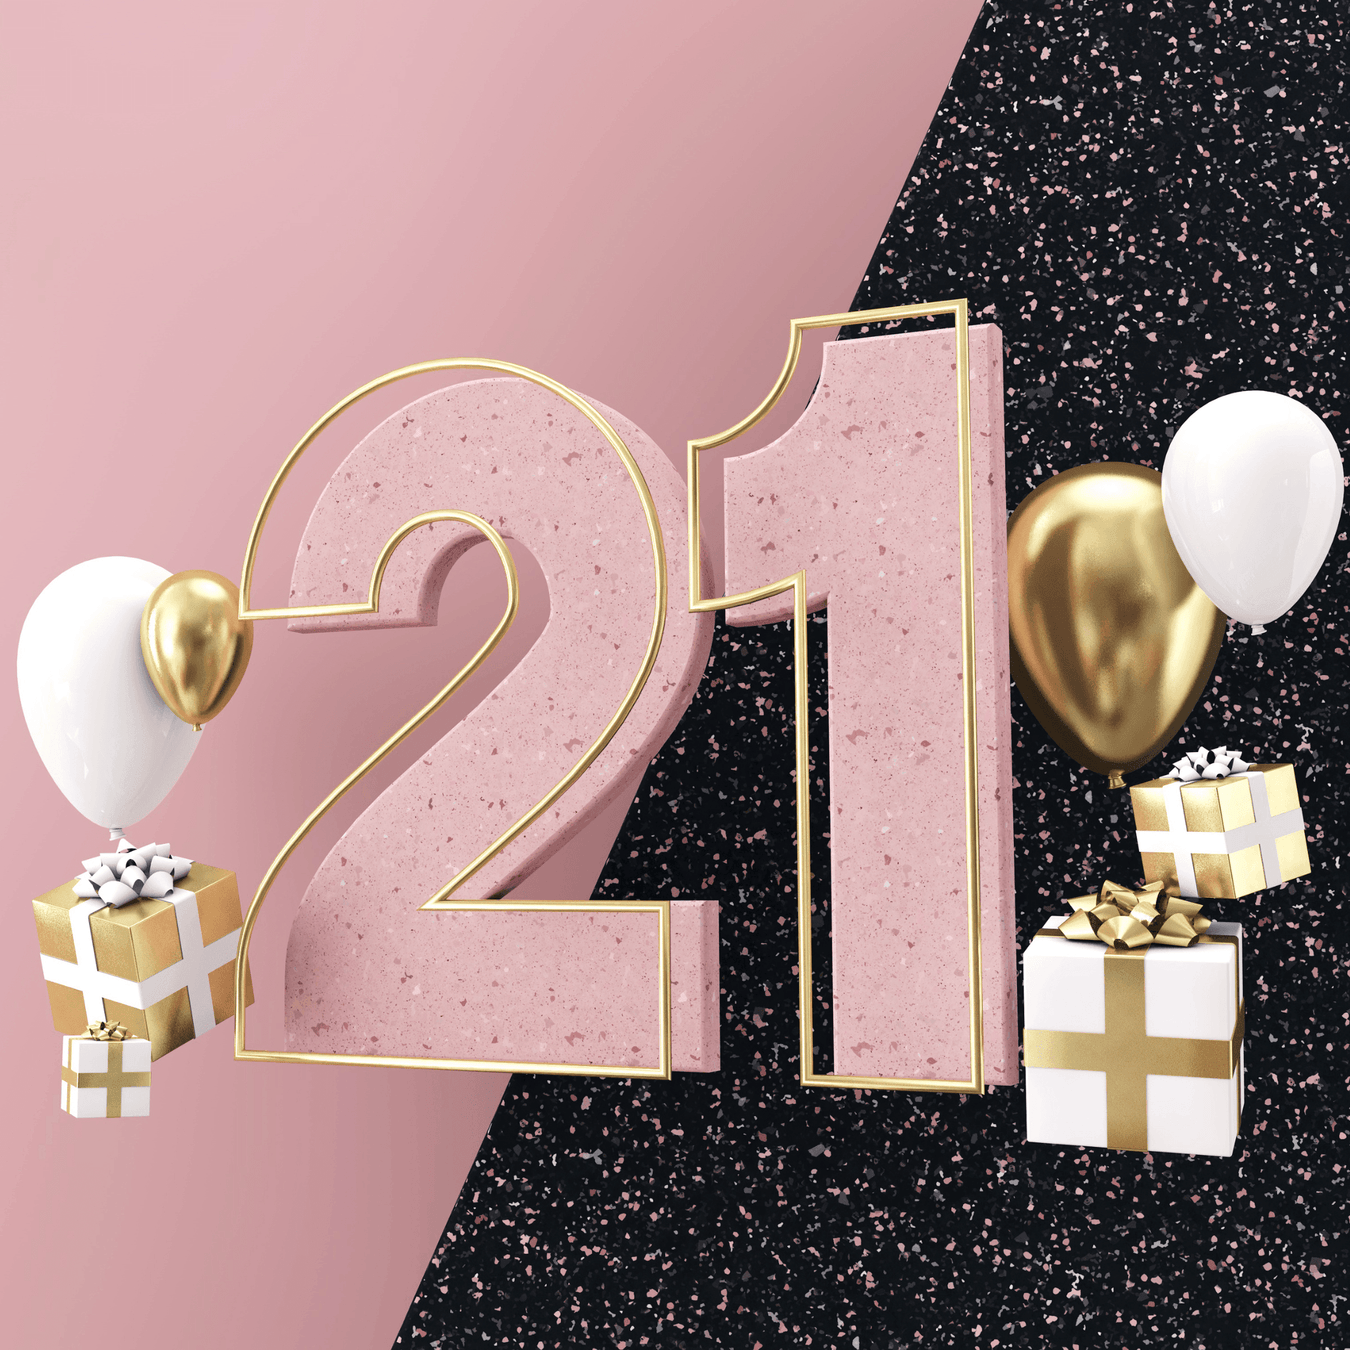 21st Birthday Gifts & Present Ideas - Giftolicious